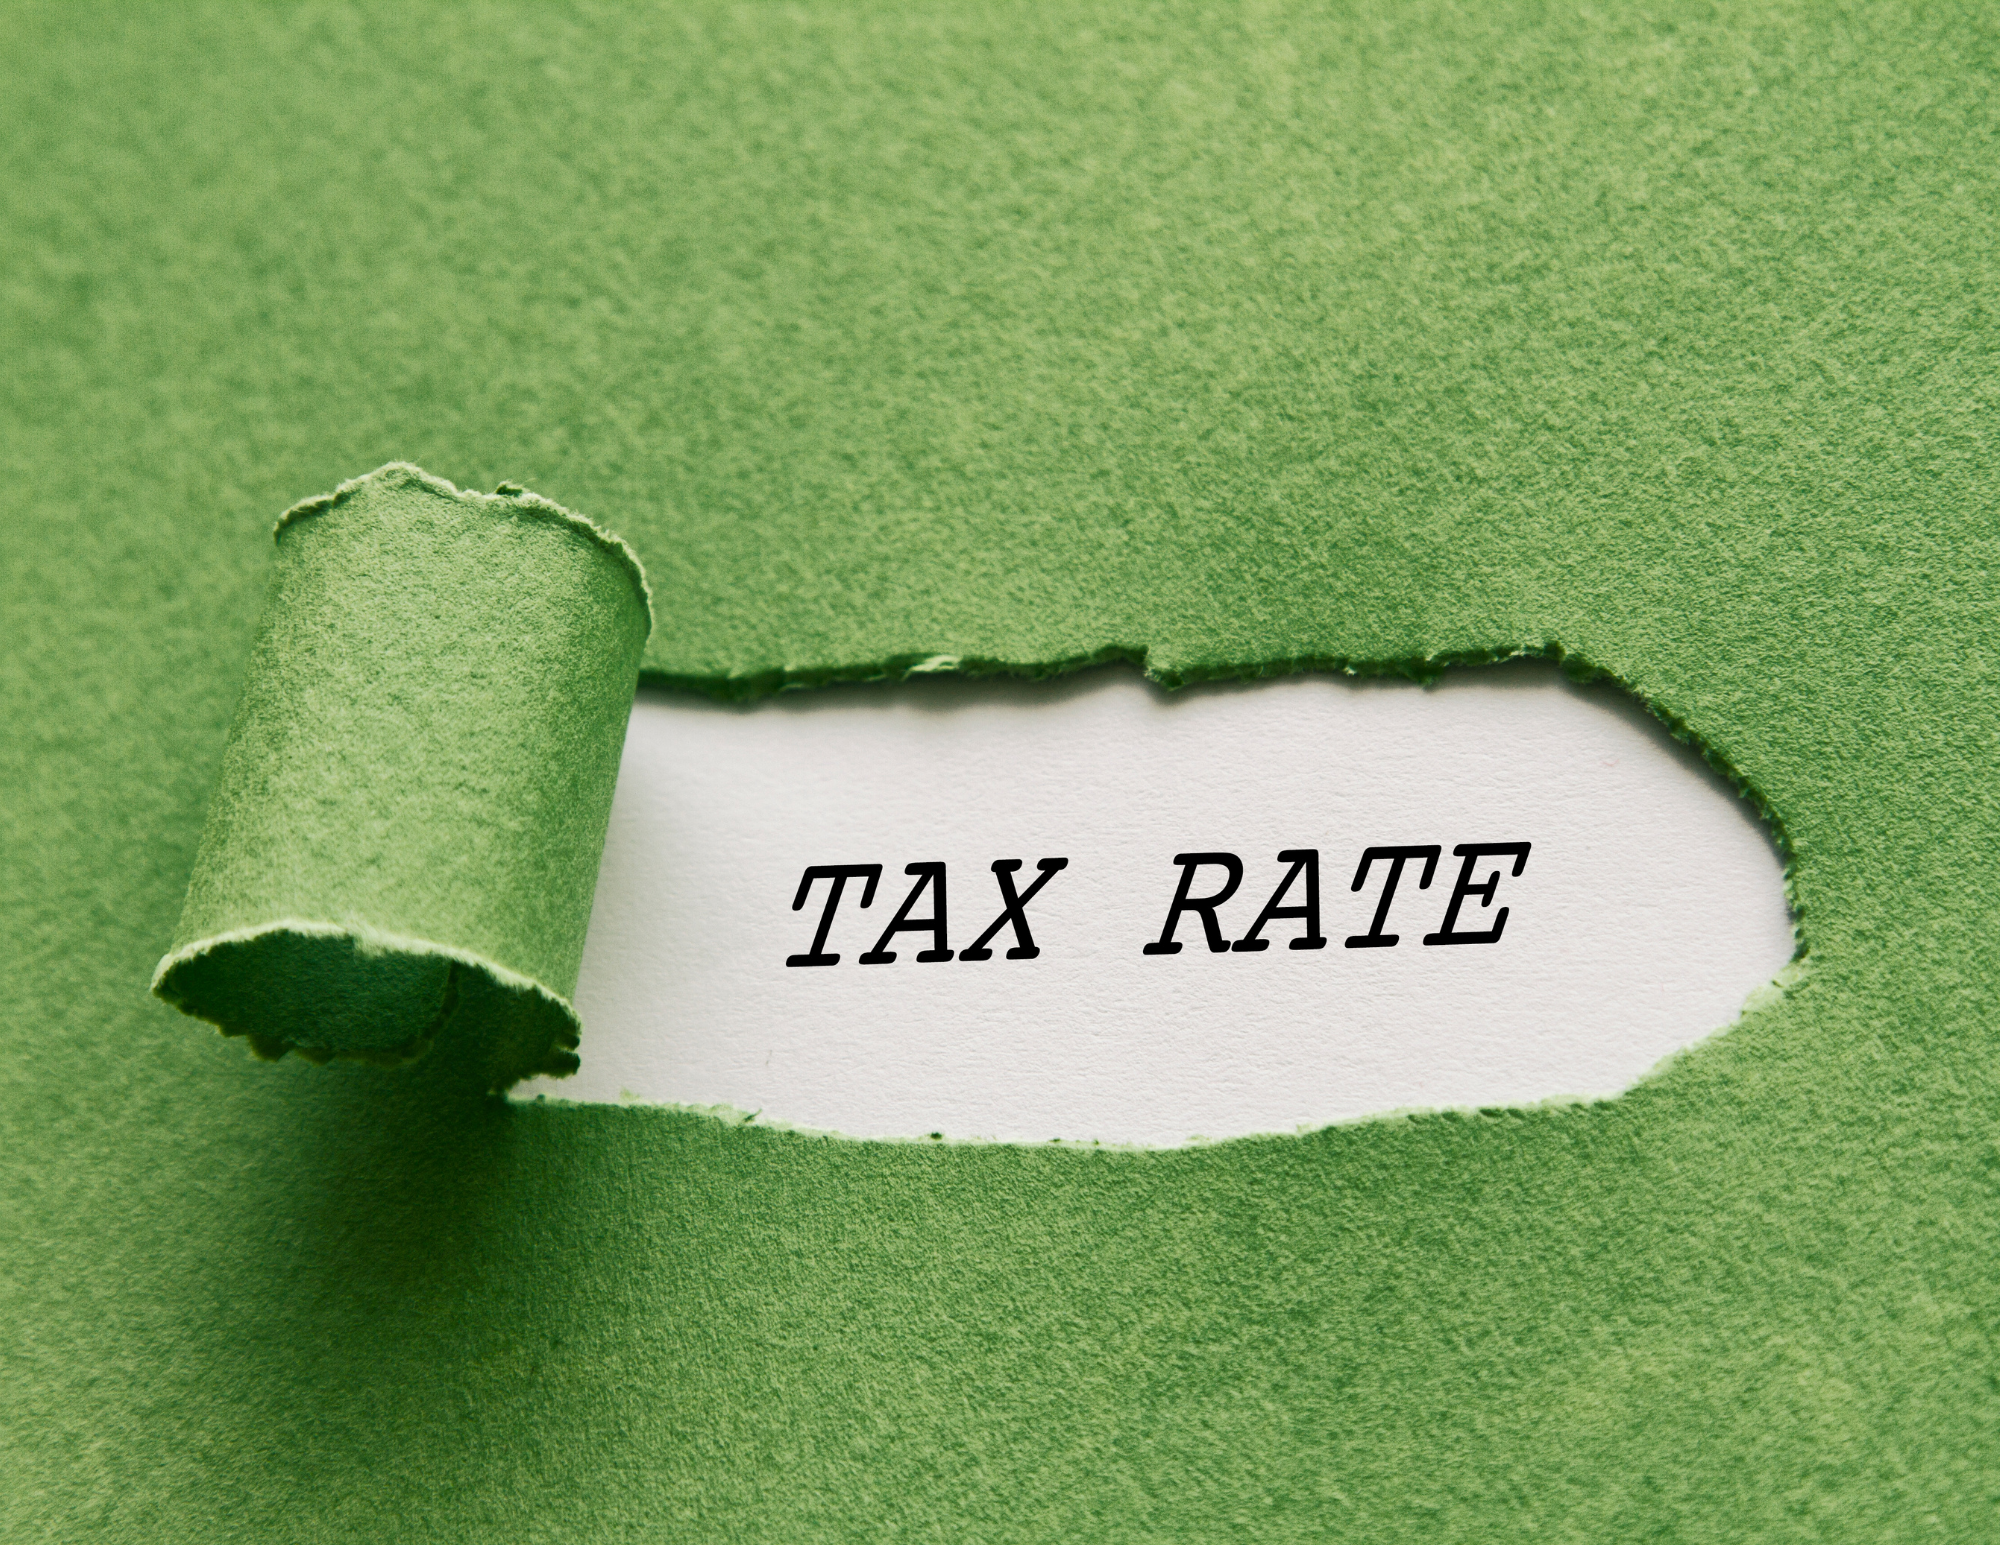 Will SUTA Tax Rates Increase Due to COVID-19 and Rising Unemployment?